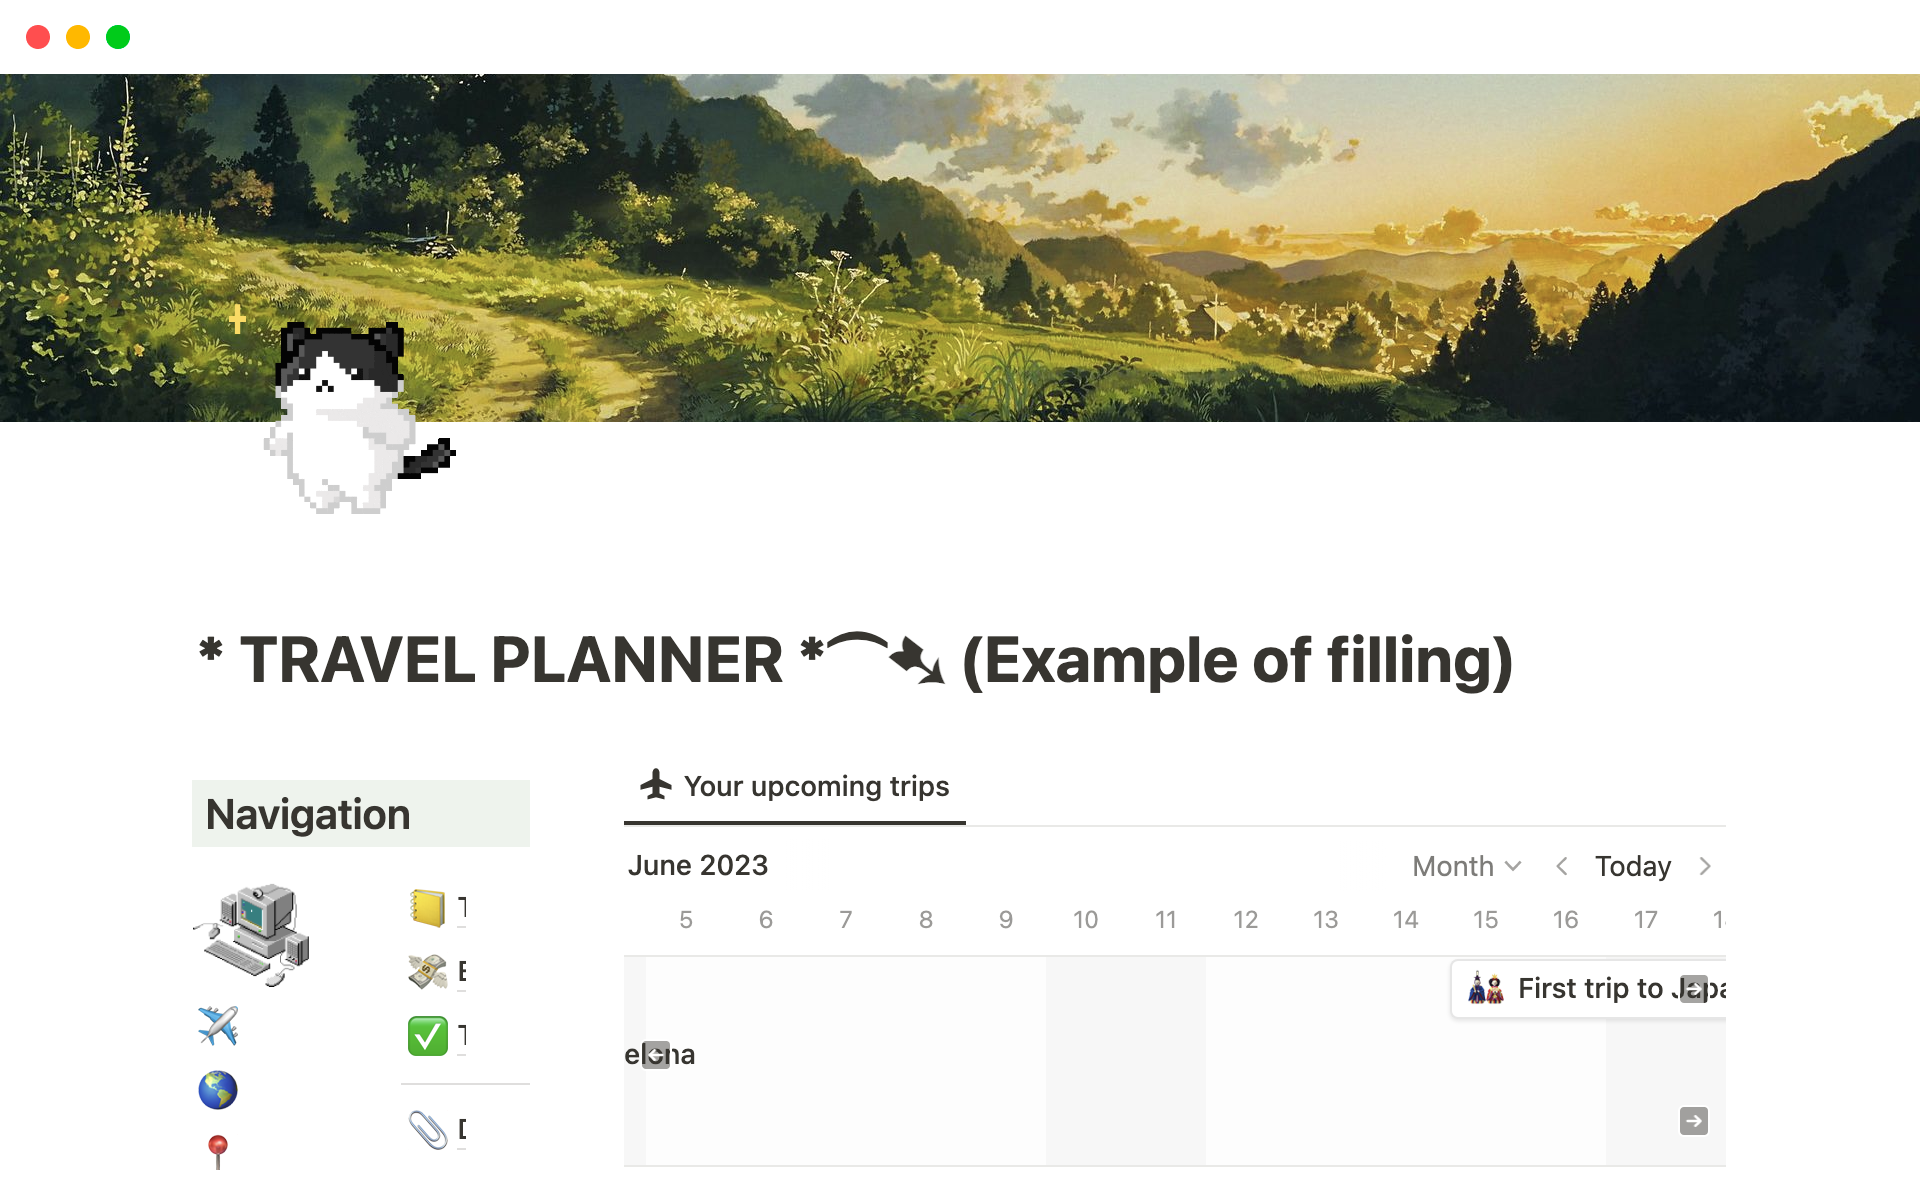 A template preview for Ultimate Travel Planner